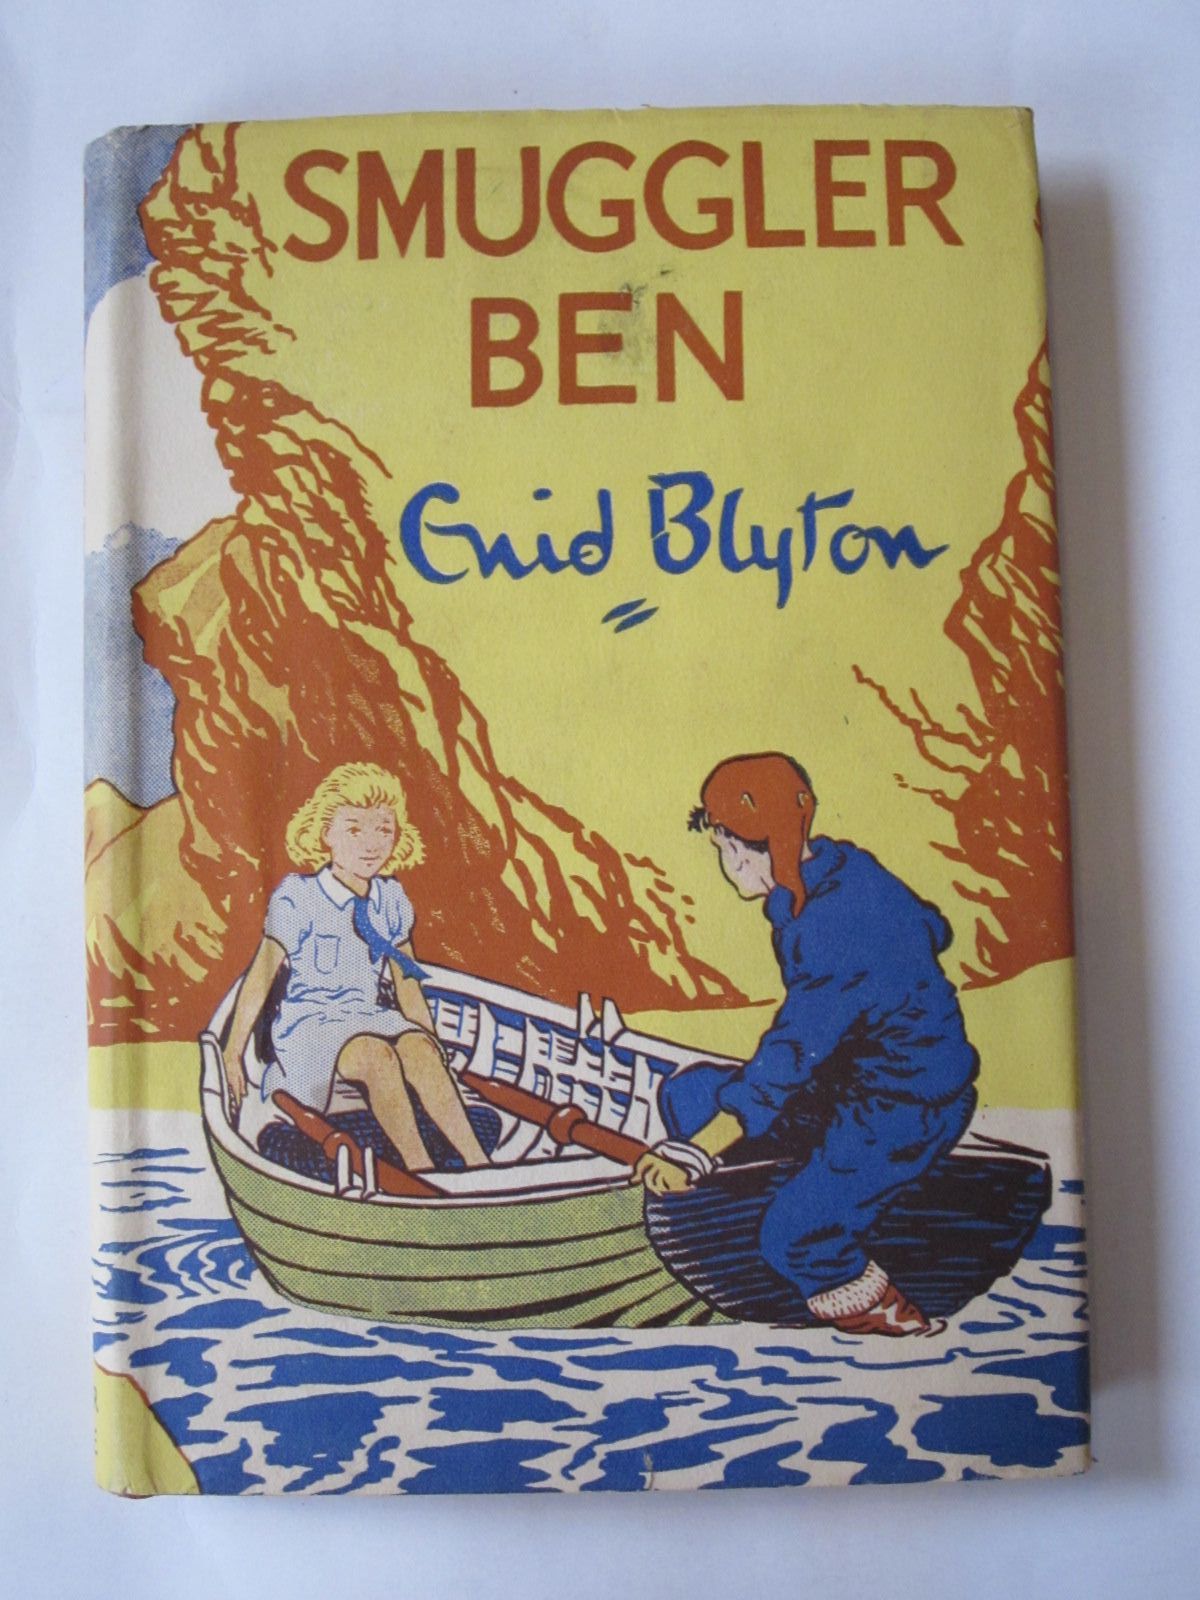 Photo of SMUGGLER BEN written by Blyton, Enid illustrated by Backhouse, G.W. published by Werner Laurie (STOCK CODE: 1308419)  for sale by Stella & Rose's Books